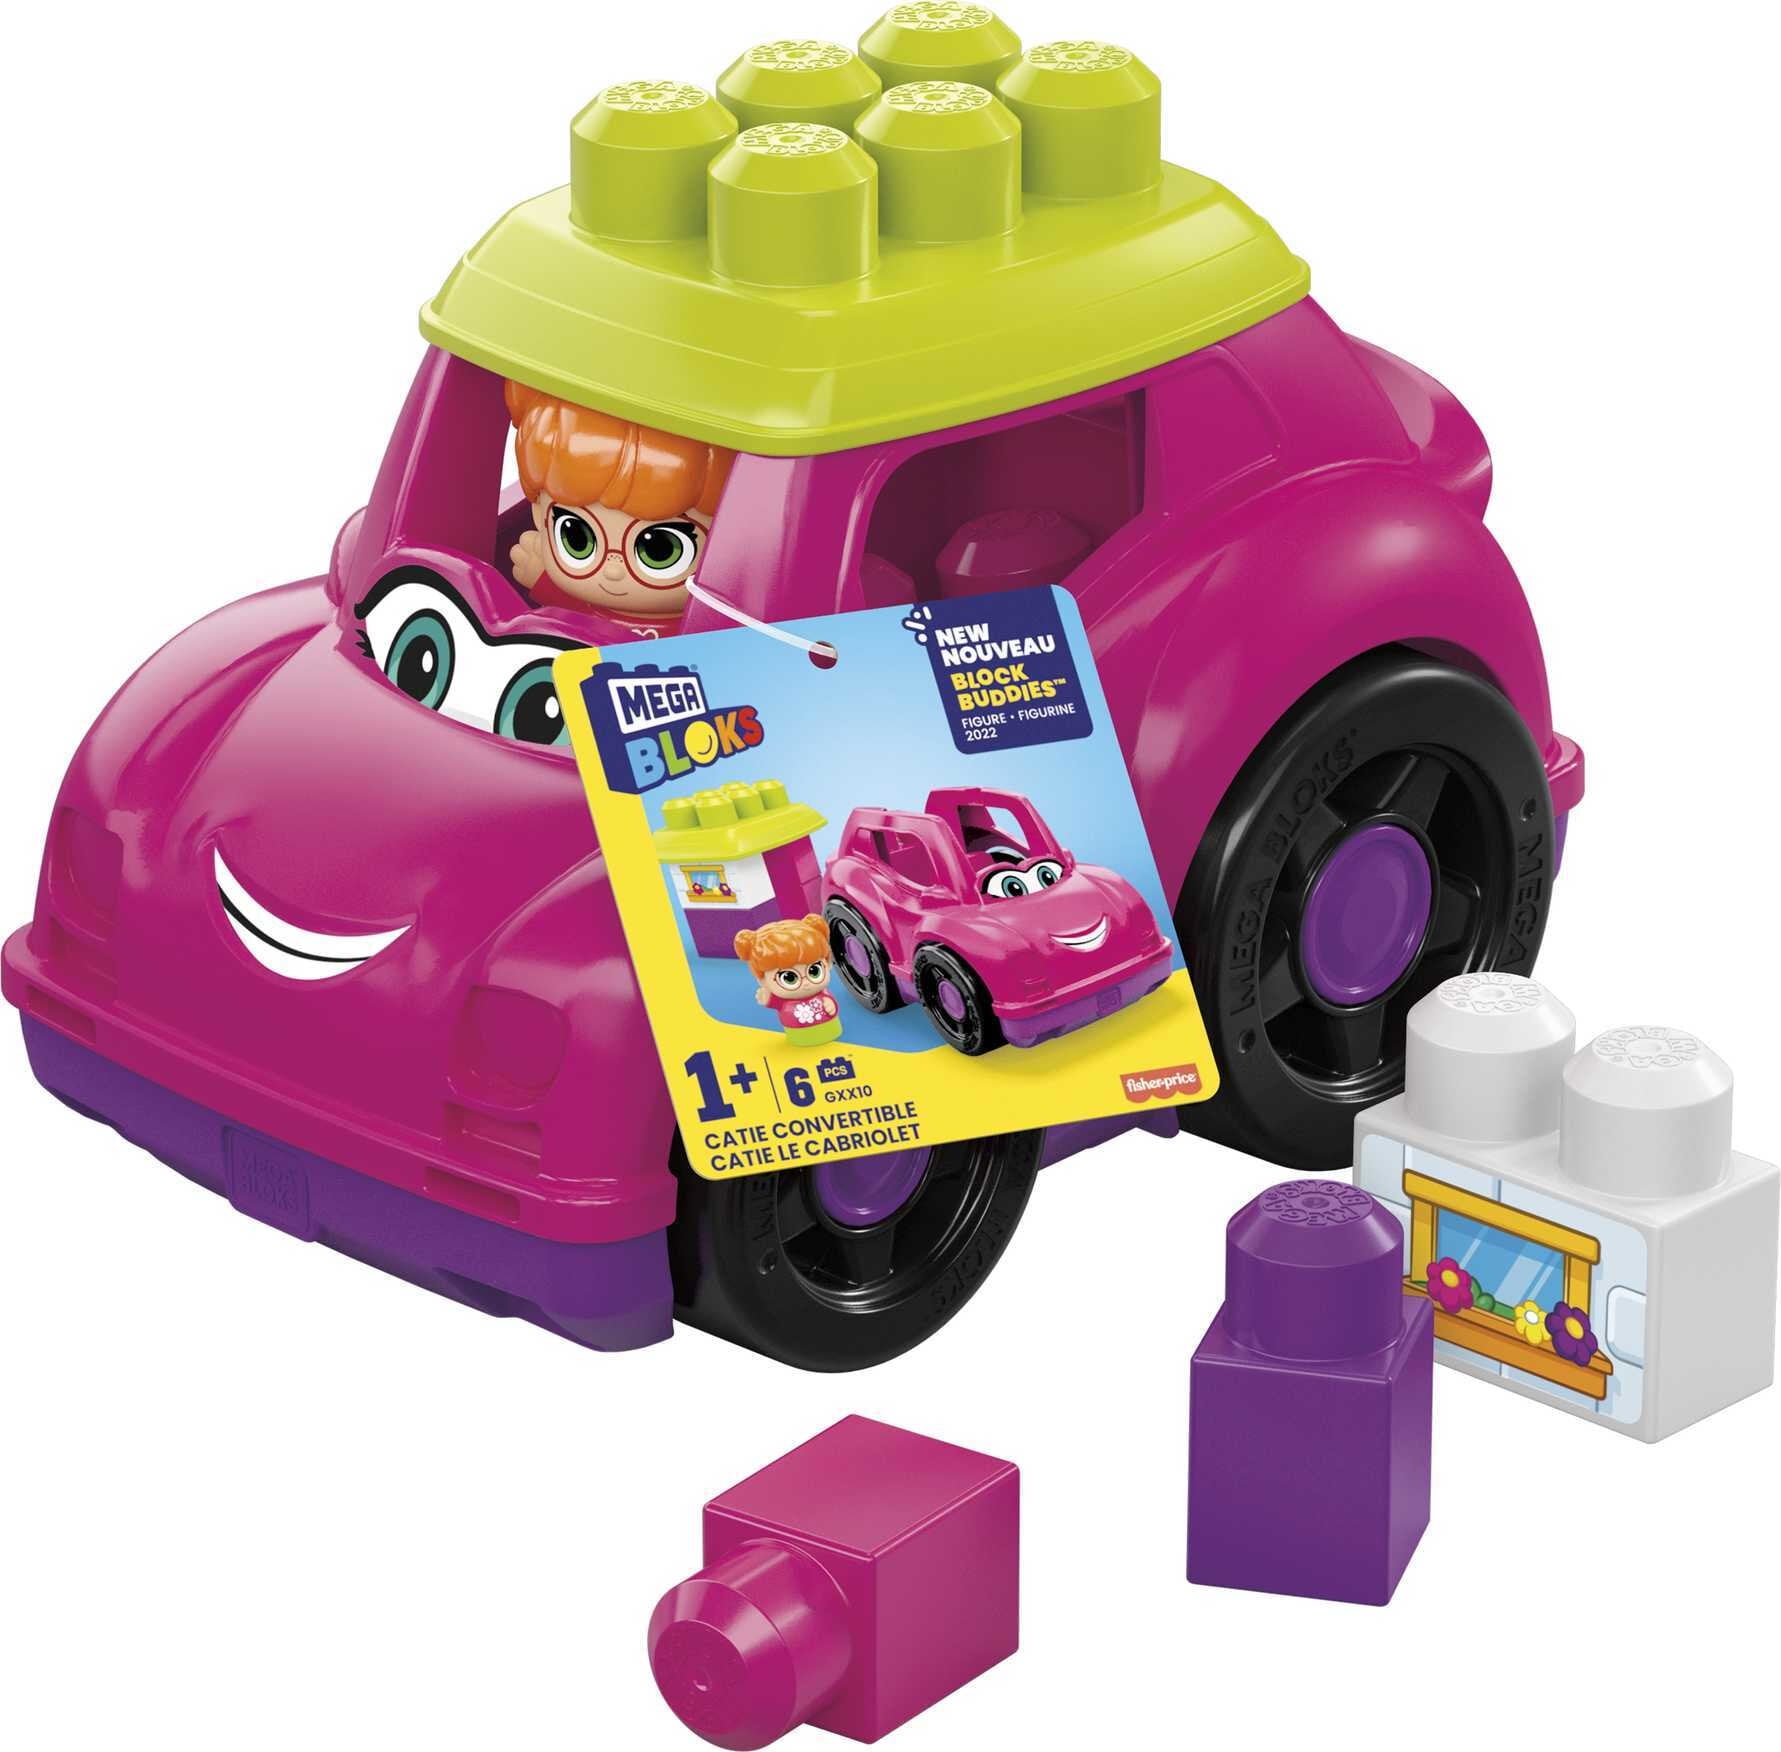 MEGA BLOKS Catie Convertible Fisher-Price Toy Blocks with 1 Figure (6 pieces) for Toddler (Easter Basket Stuffer)